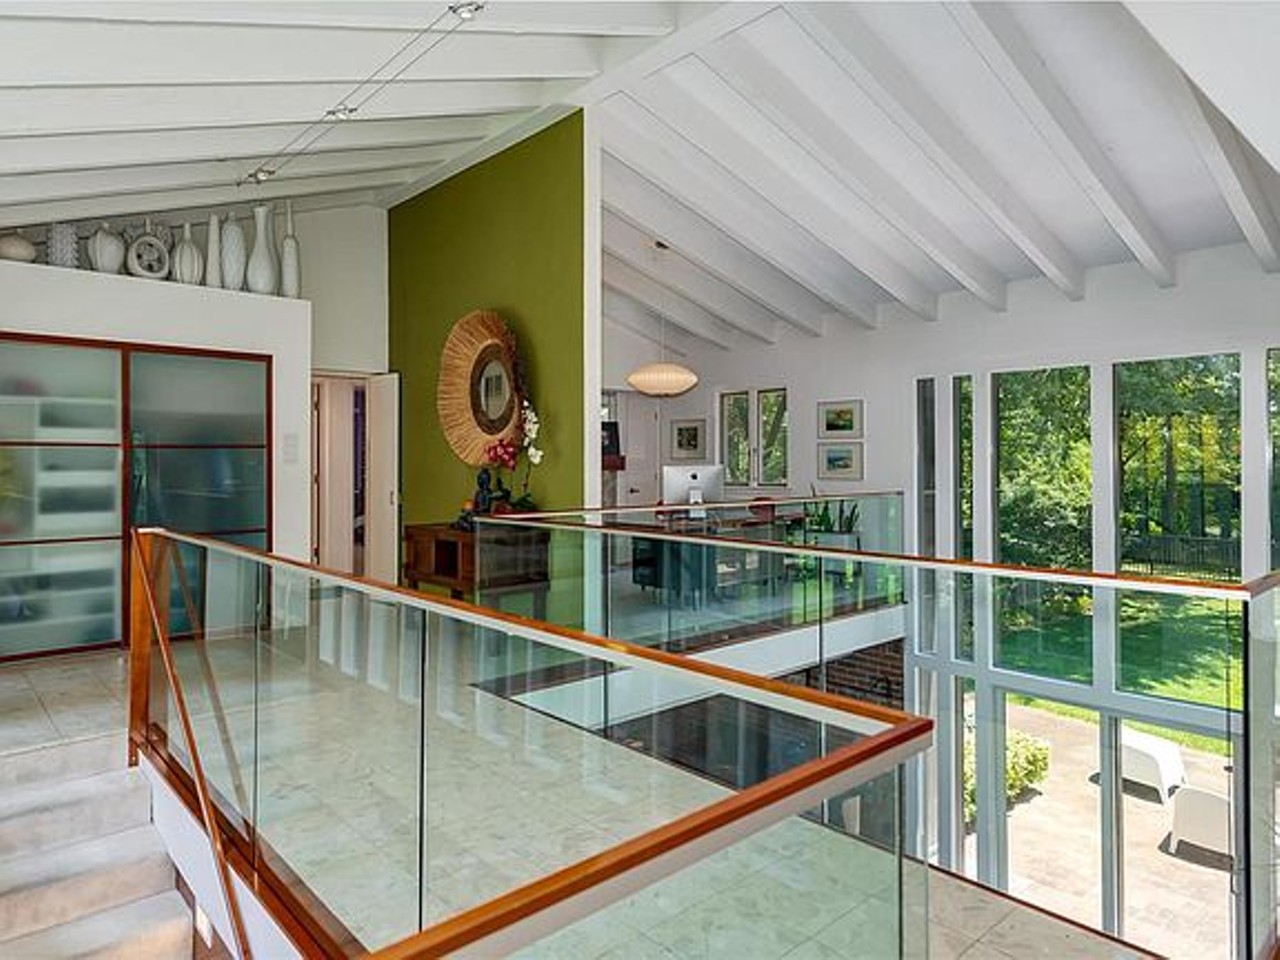 This Architect-Designed Mid-Century Modern House Is One of the Best in St. Louis [PHOTOS]